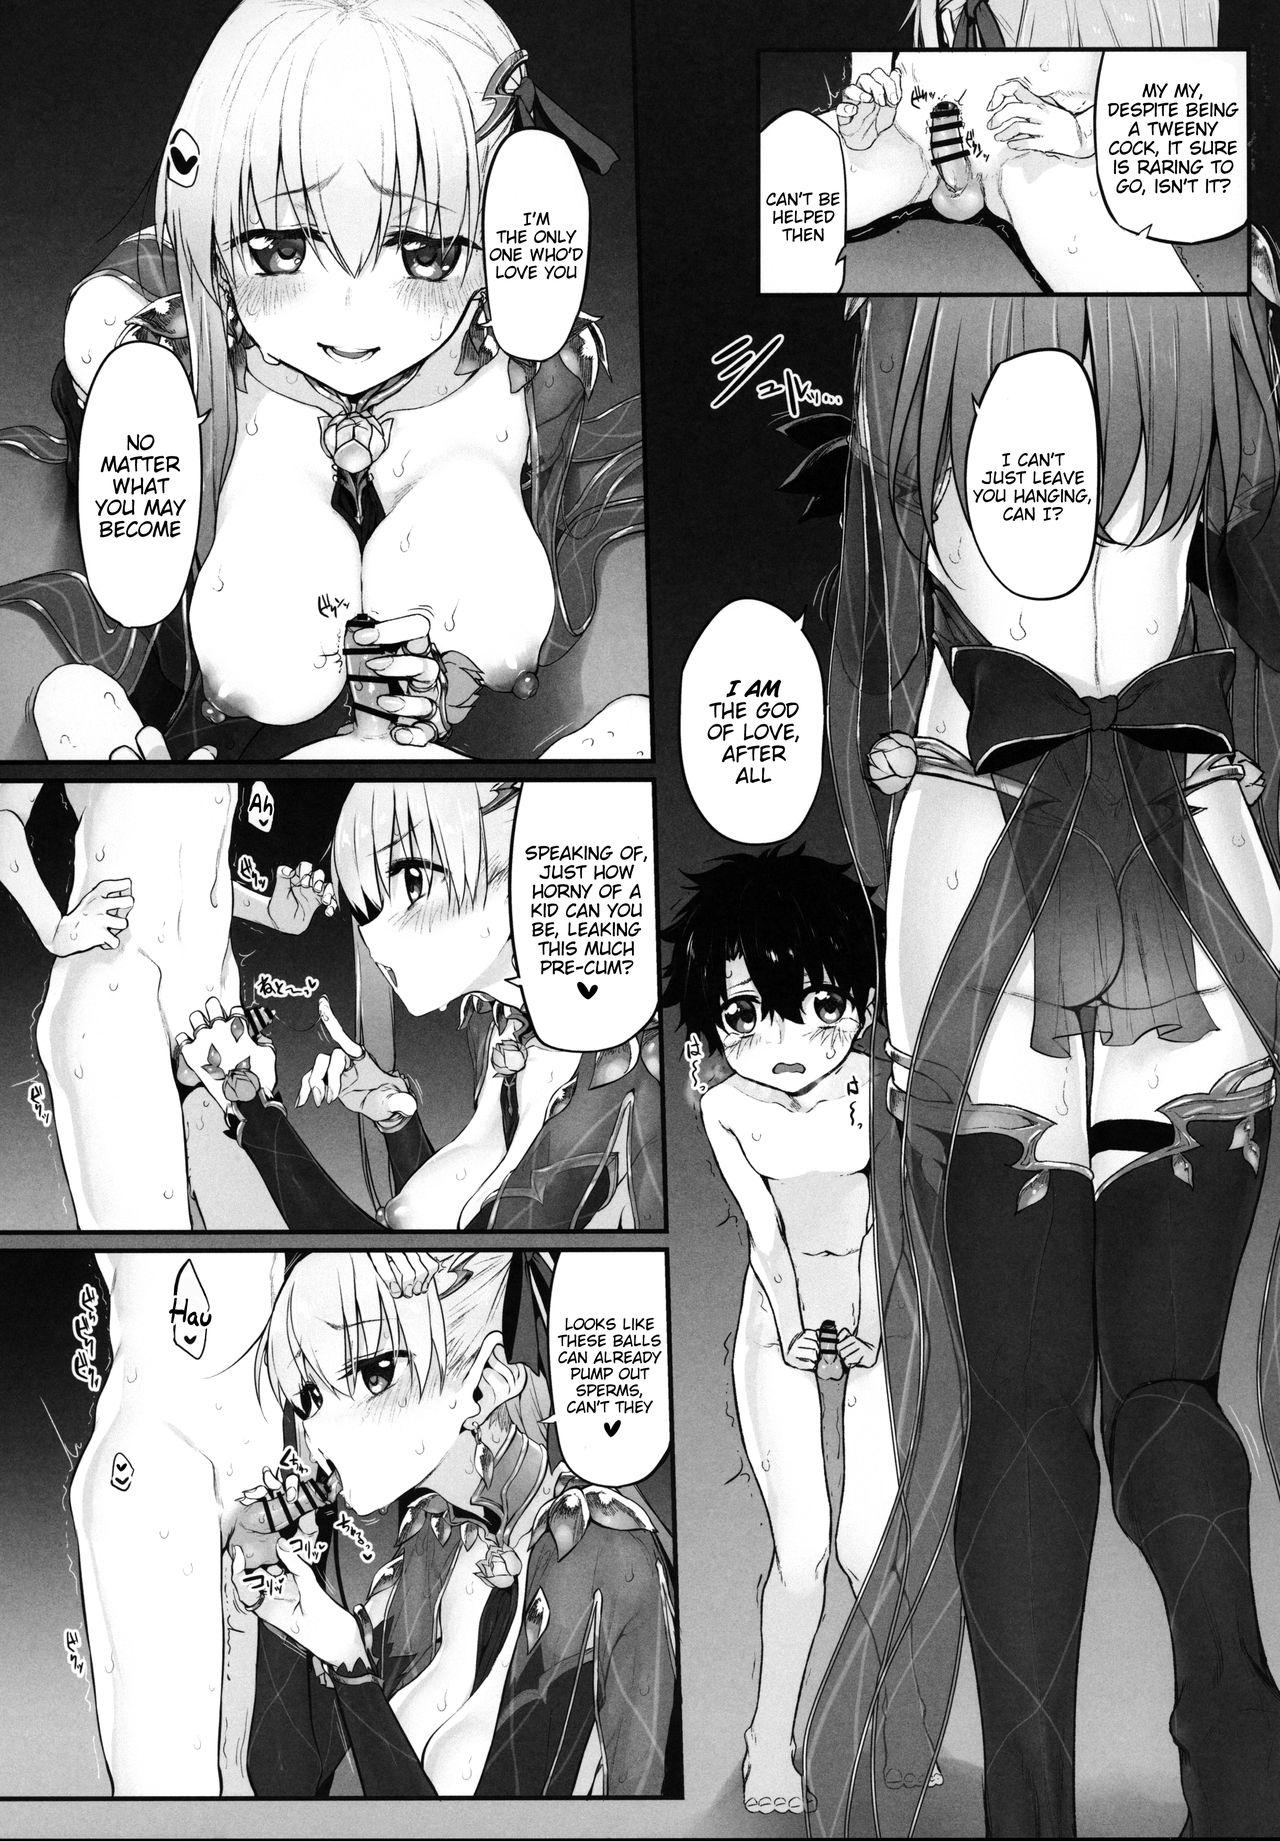 Pussylick Marked Girls Vol. 21 - Fate grand order Edging - Page 6